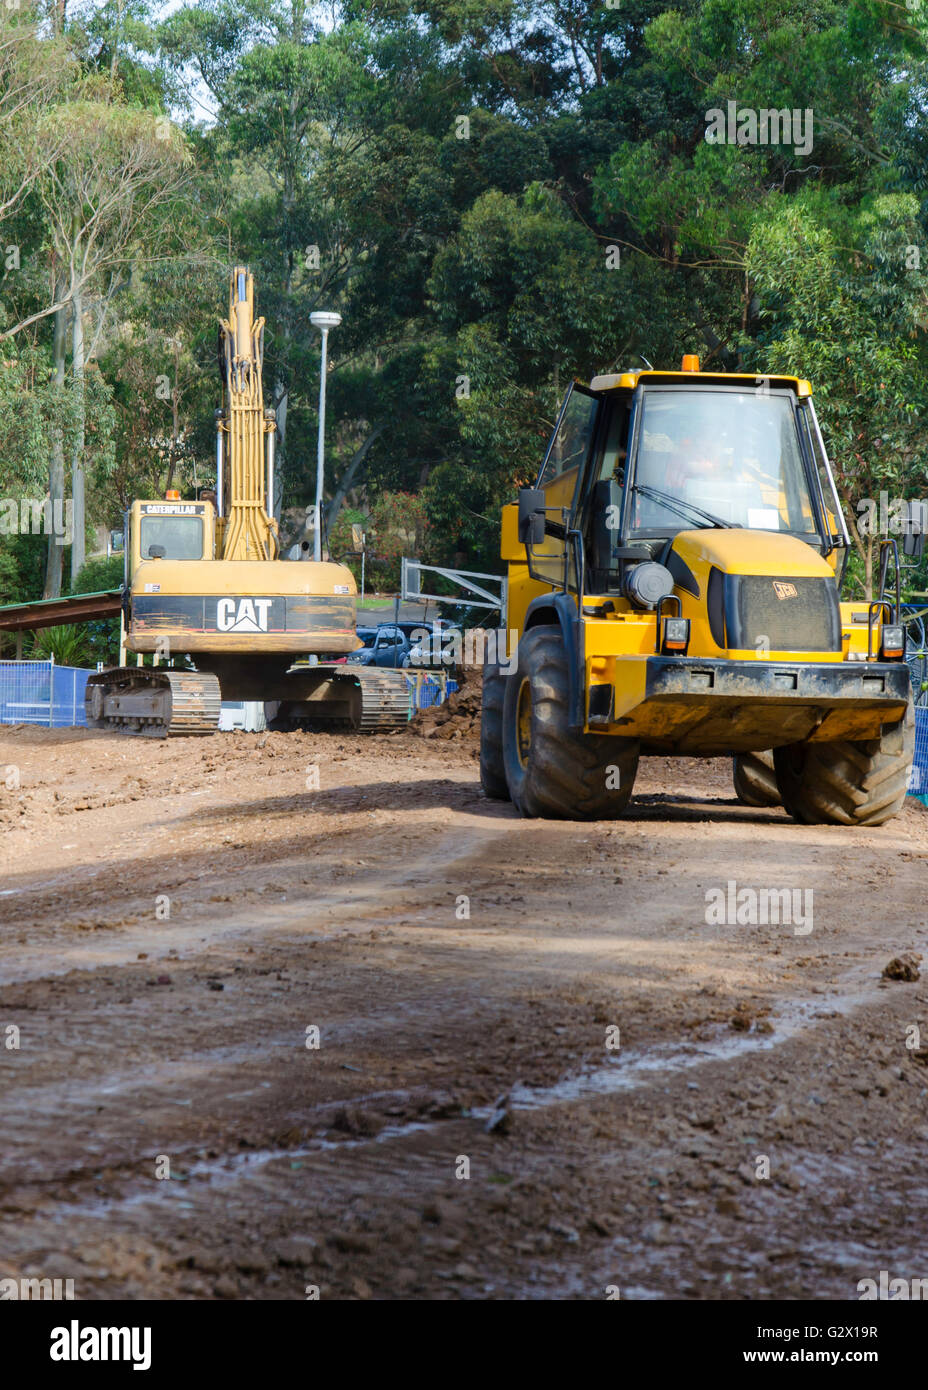 Excavators and earth moving equipment working on a construction site in Australia Stock Photo